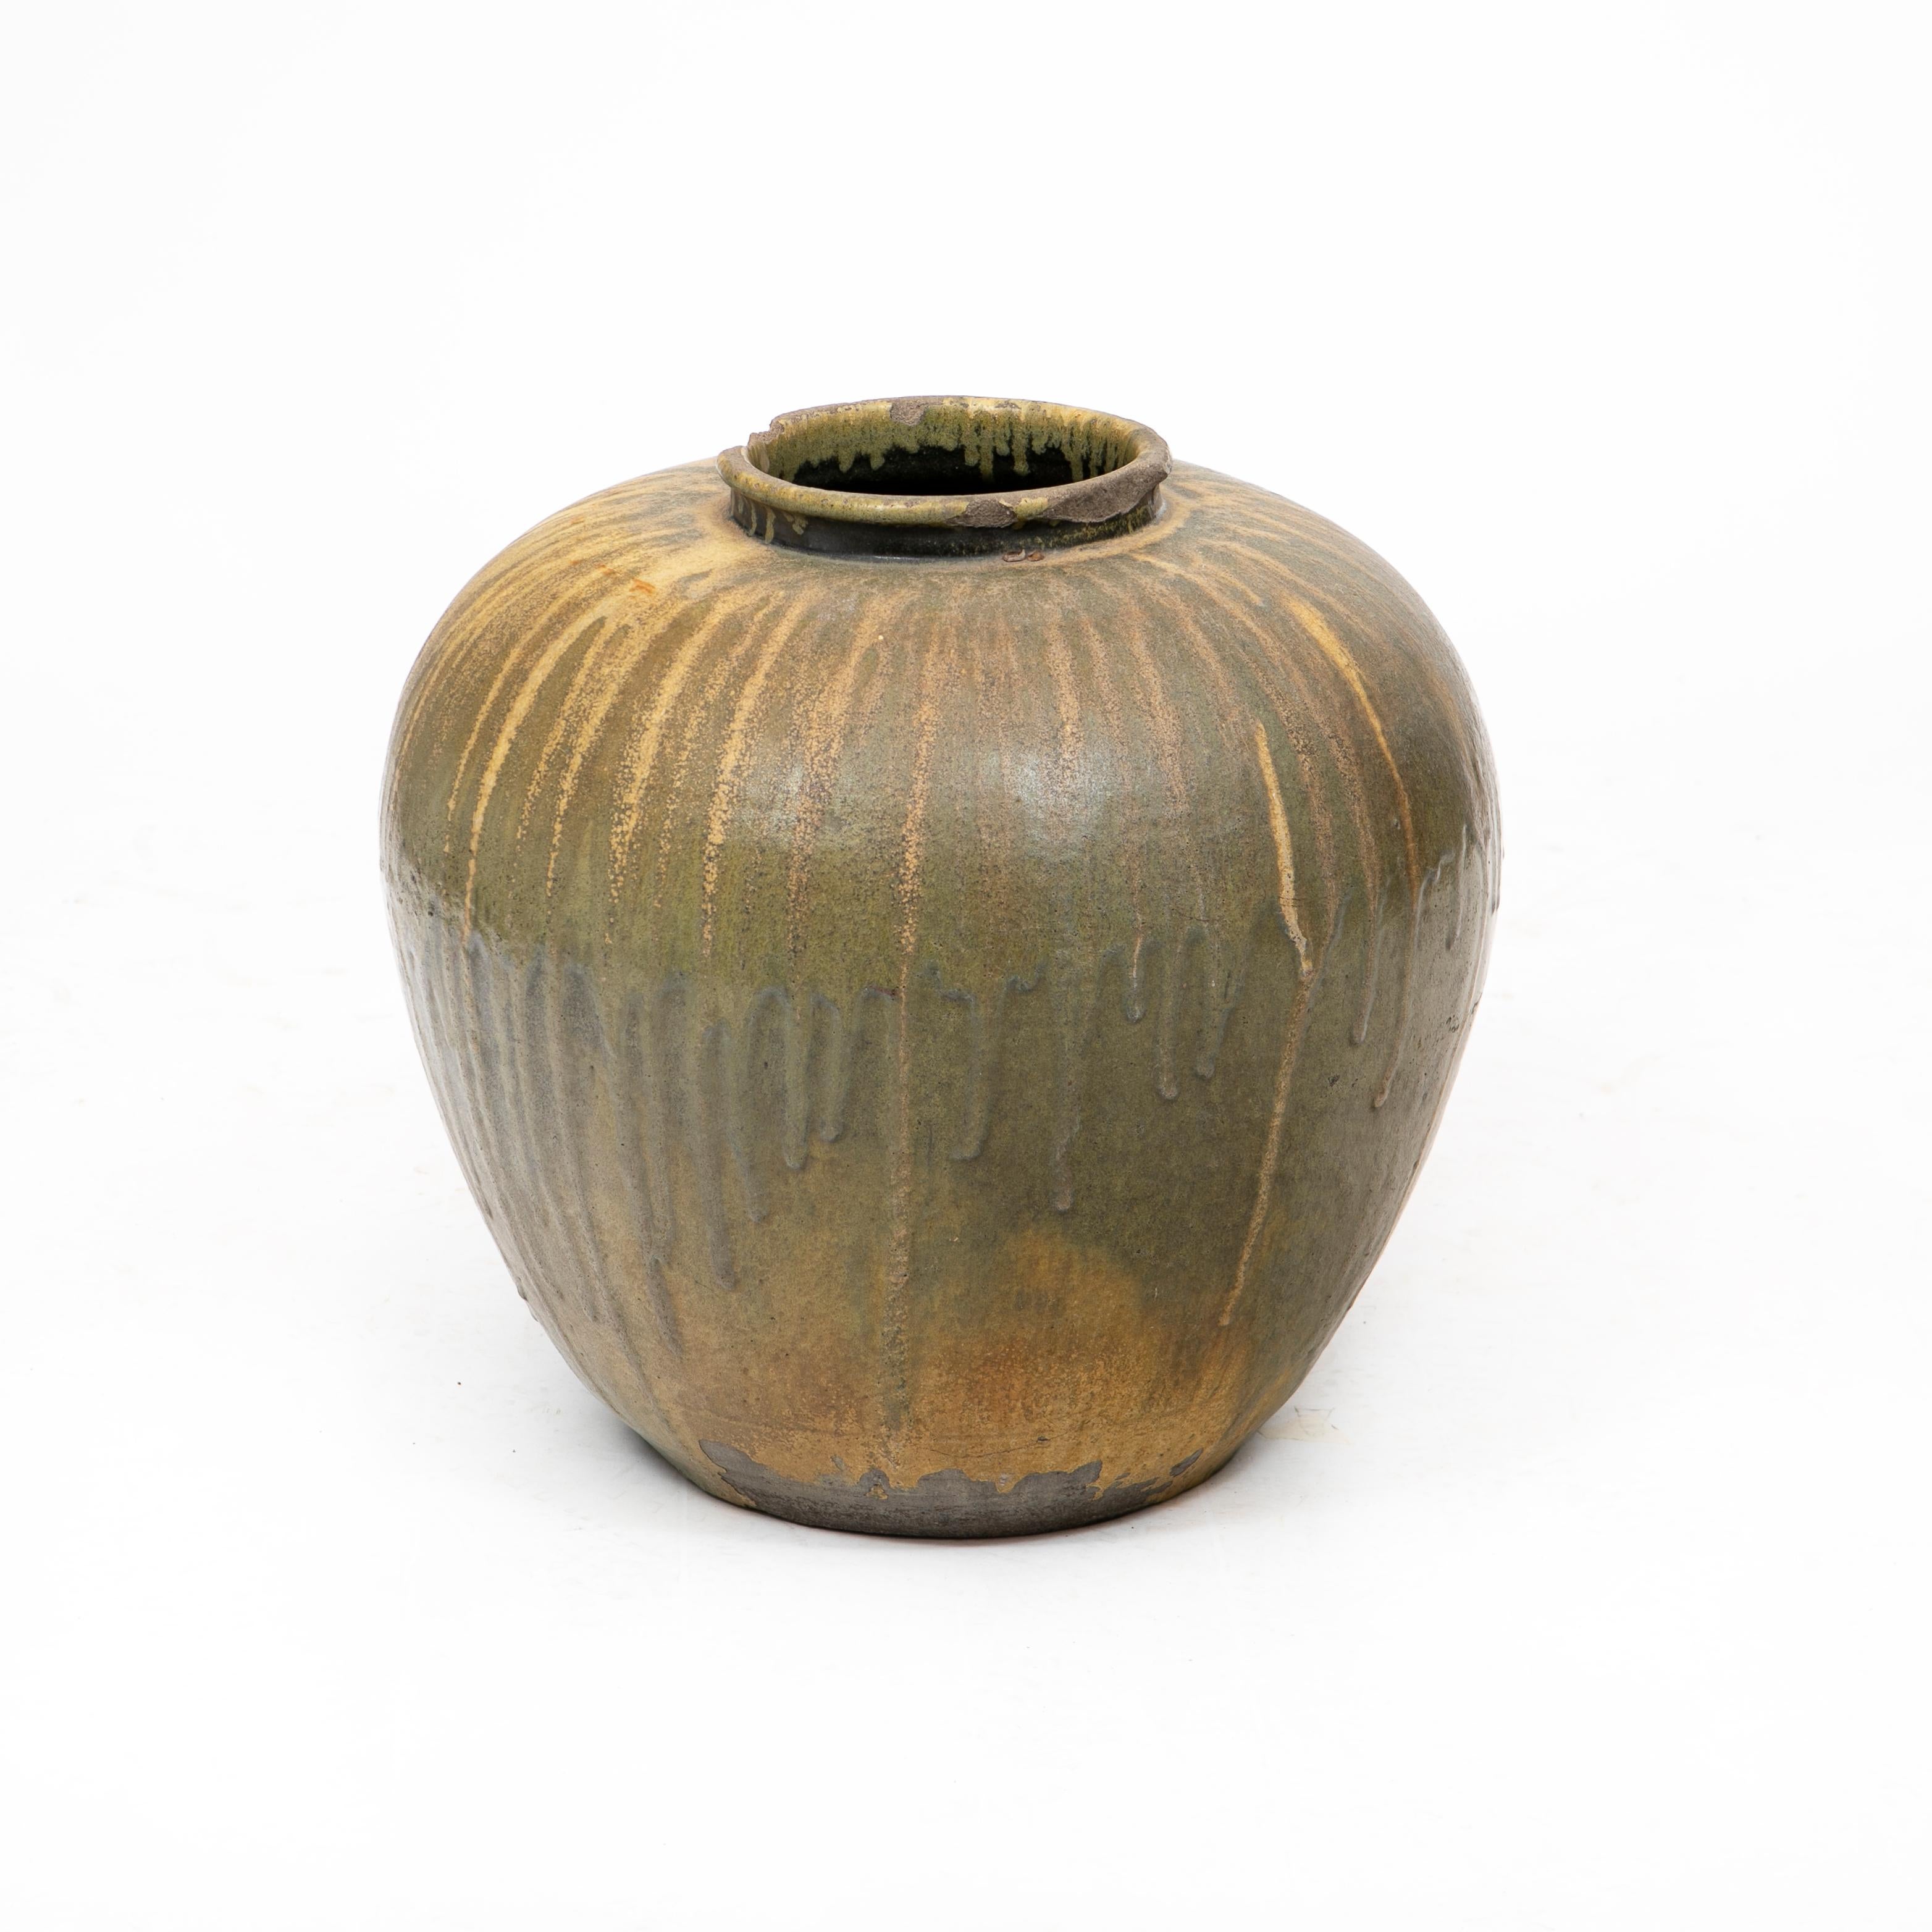 Large decorative Japanesse stoneware vase of jar with a dripping glaze in greenish and ocher shades.

Old chip to the upper rim.

Meiji period, 19th century.